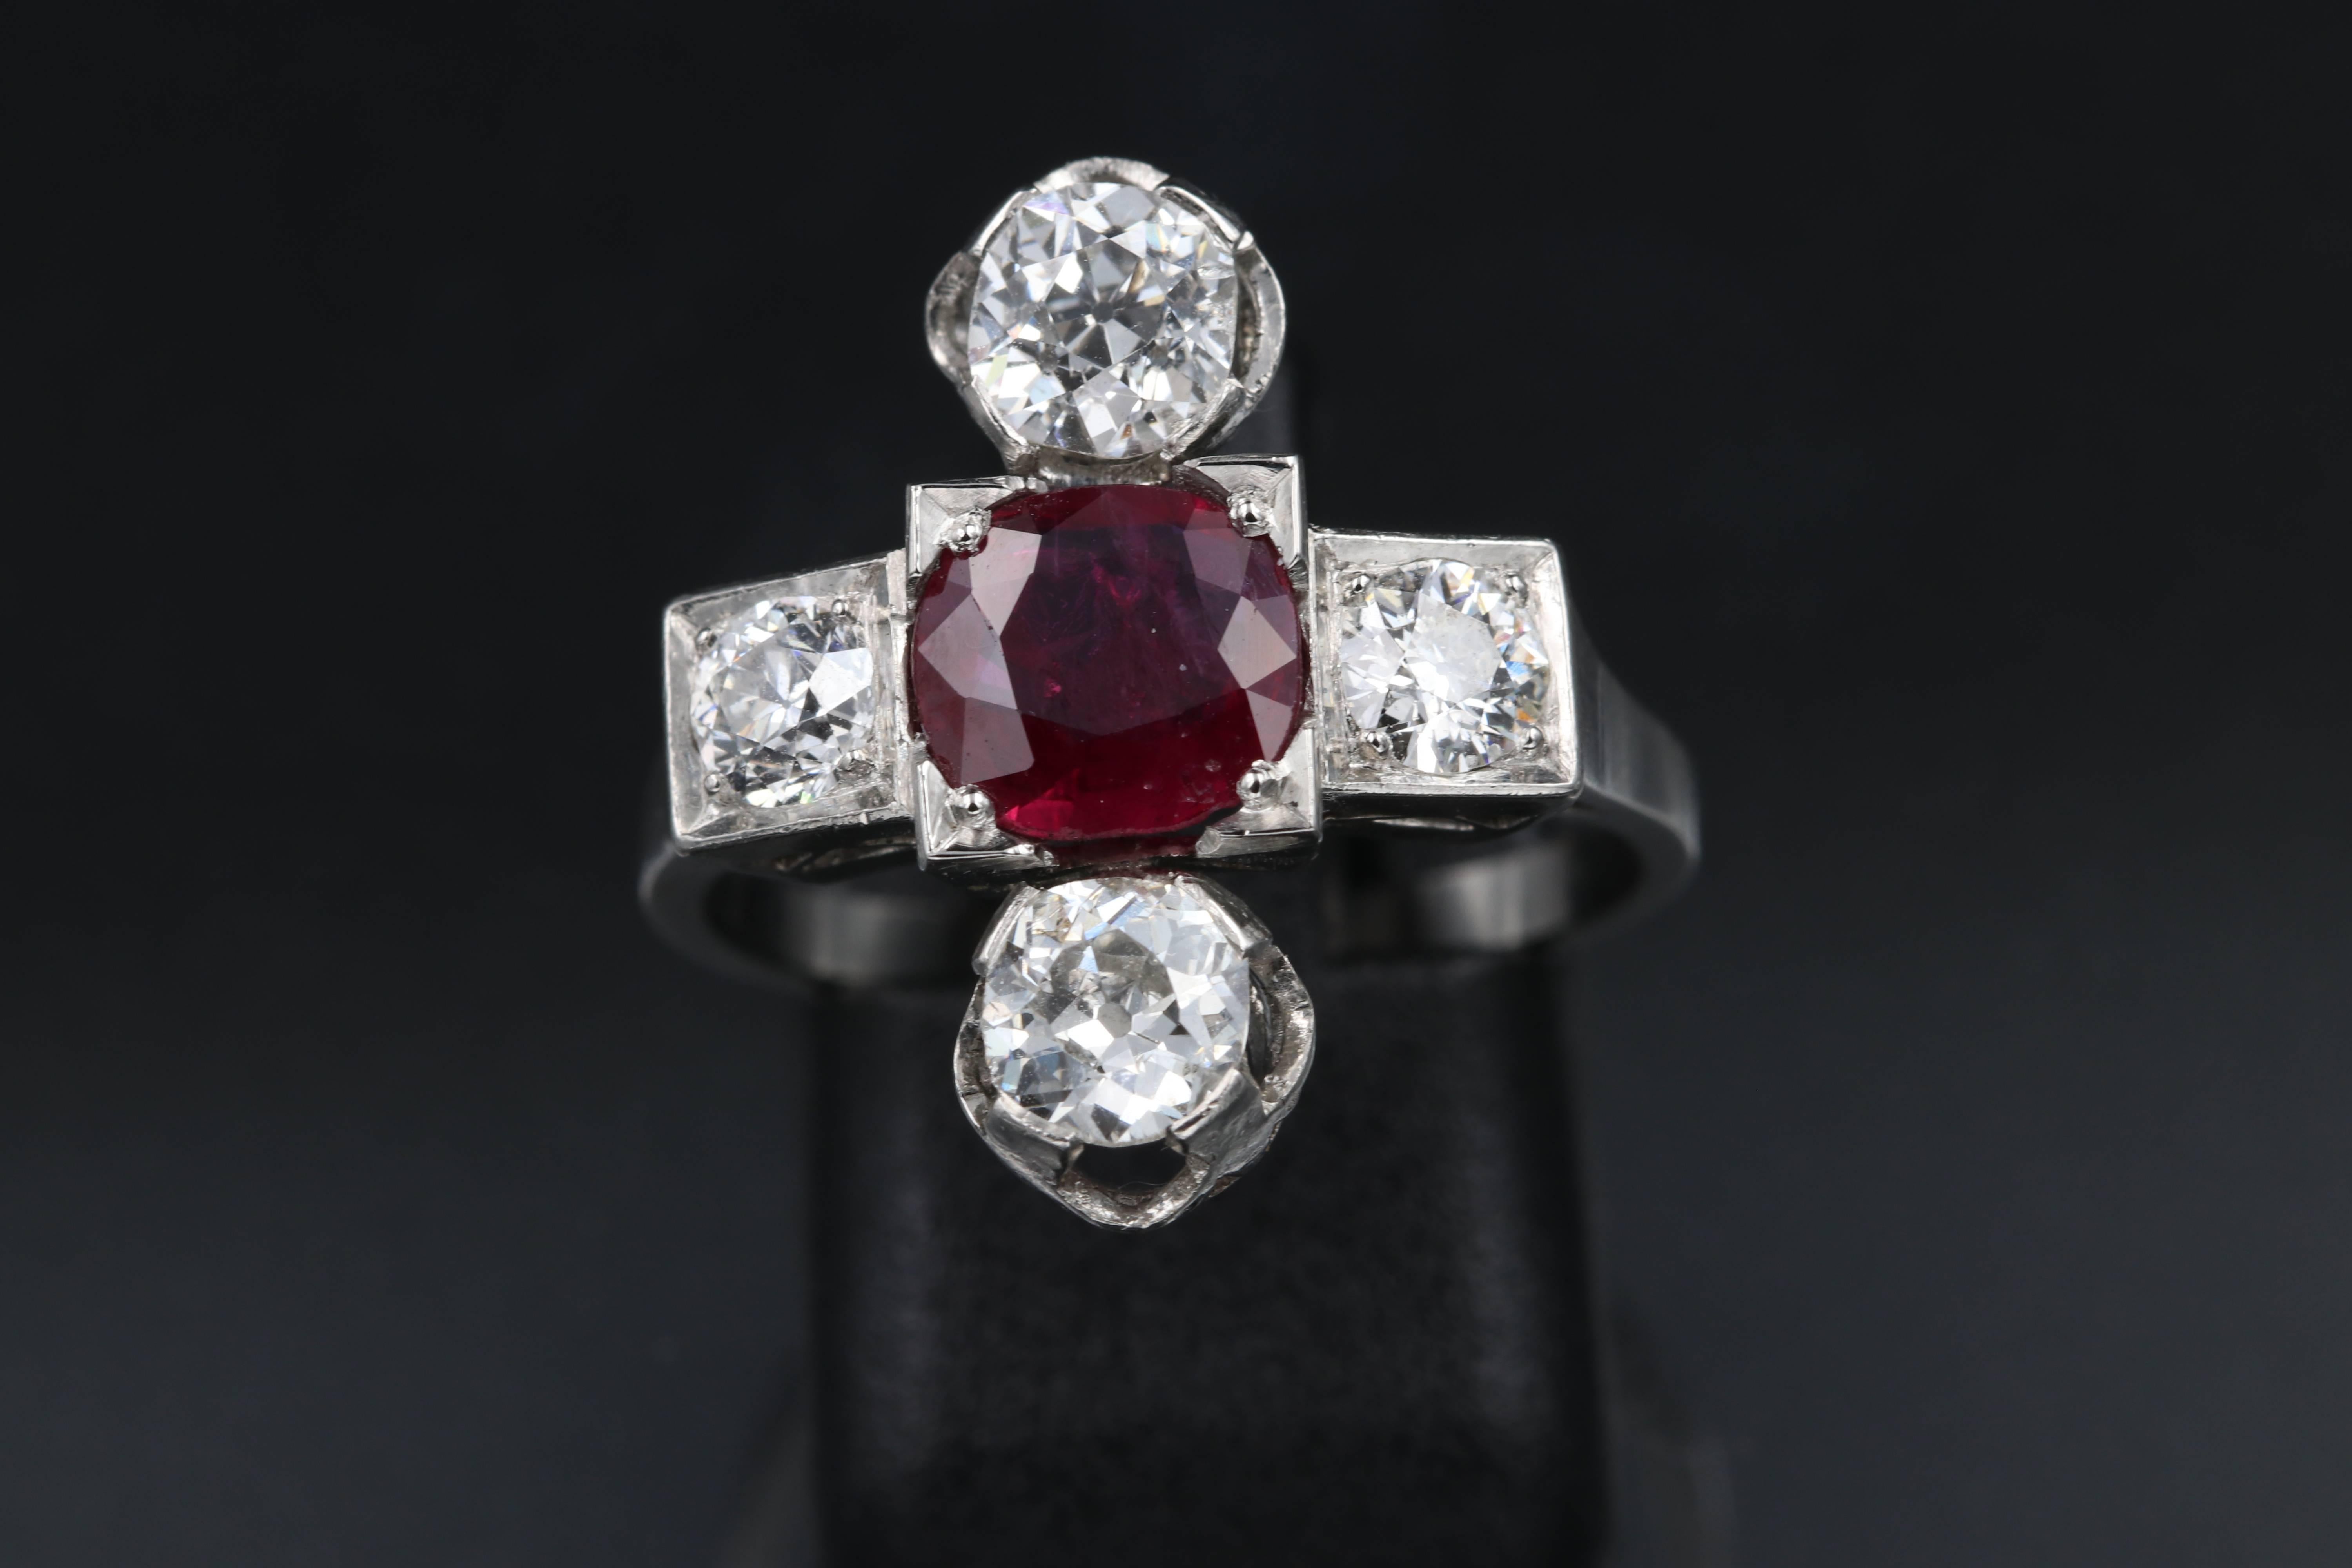 Beautiful art deco ring, with a natural ruby of approximately 1.5 carats. 
The Diamonds weights approximately 1.8 carats for the total.
the ring has original French marks.
Made in France circa 1930.
the size is 55 europe or 7.25 US. Sizeable
The